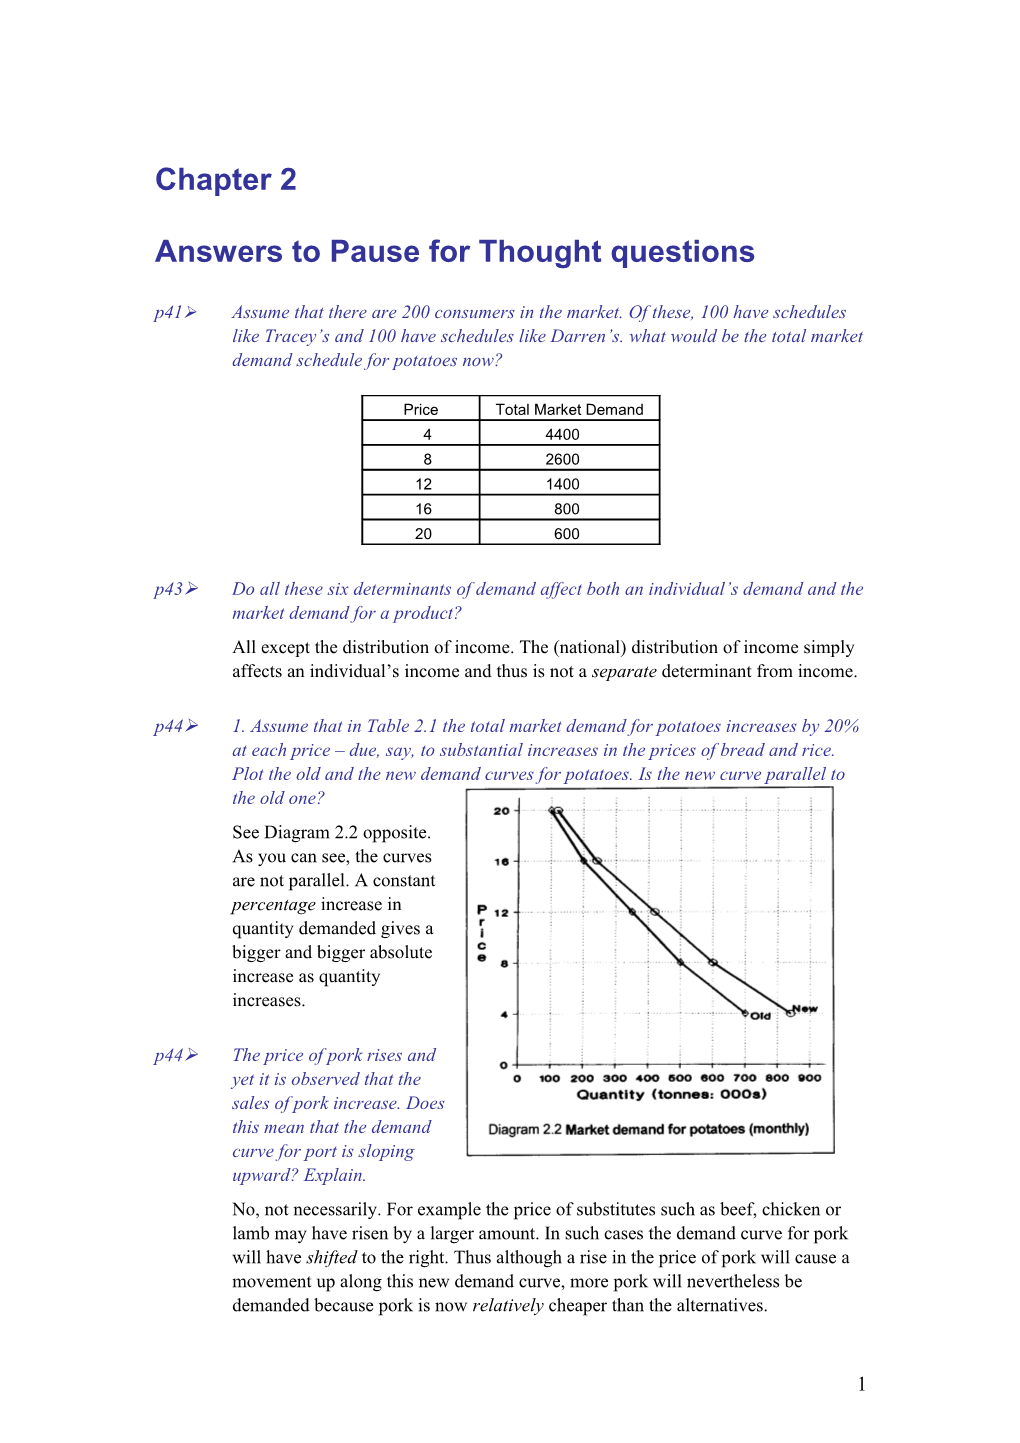 Answers to Pause for Thought Questions